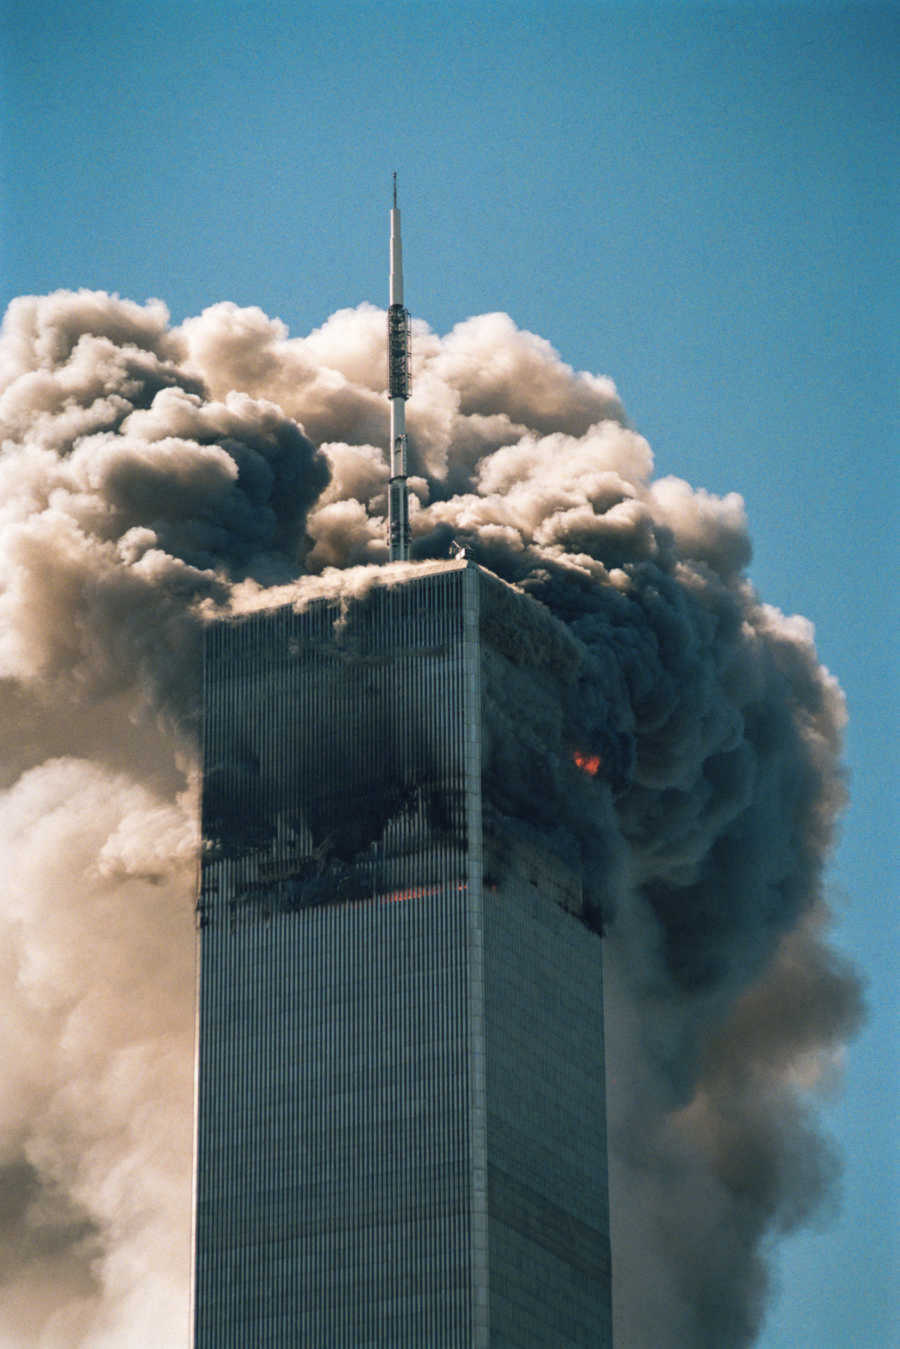 One of the twin towers as a plane crashes into it and bursts into flames